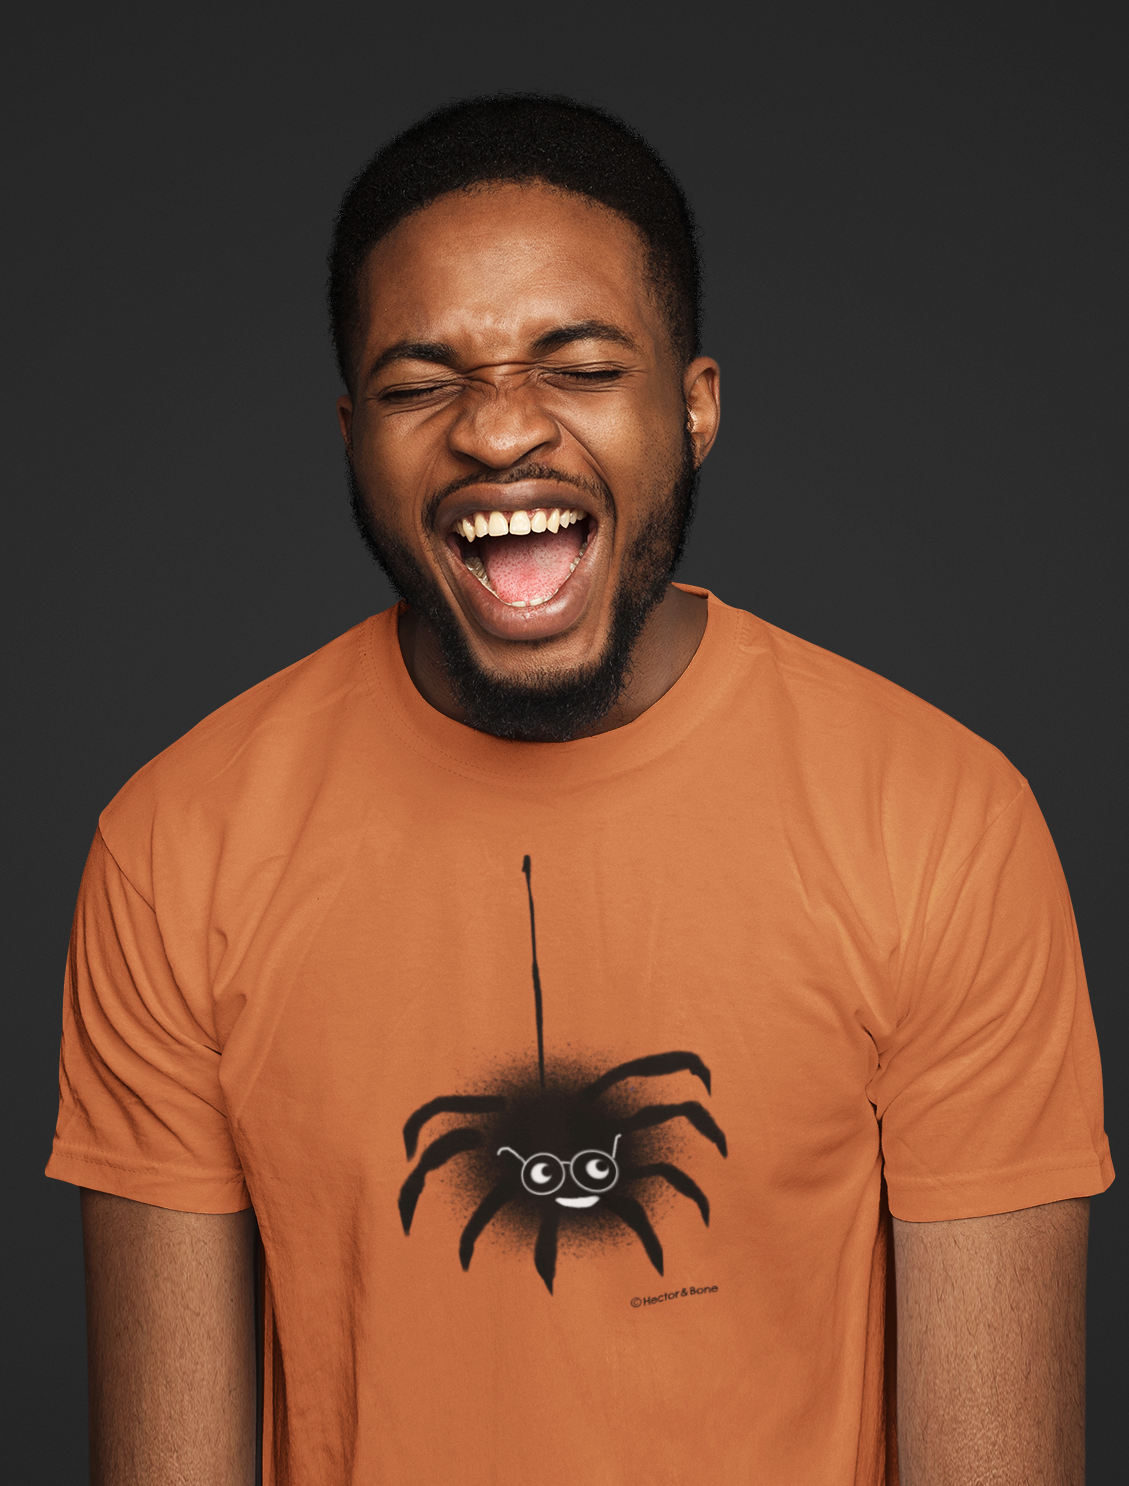 Spider T-shirt - A young man laughing wearing a cute Spectacled Spider original illustrated Halloween design on a Hector and Bone quality vegan pumpkin orange colour cotton t-shirt